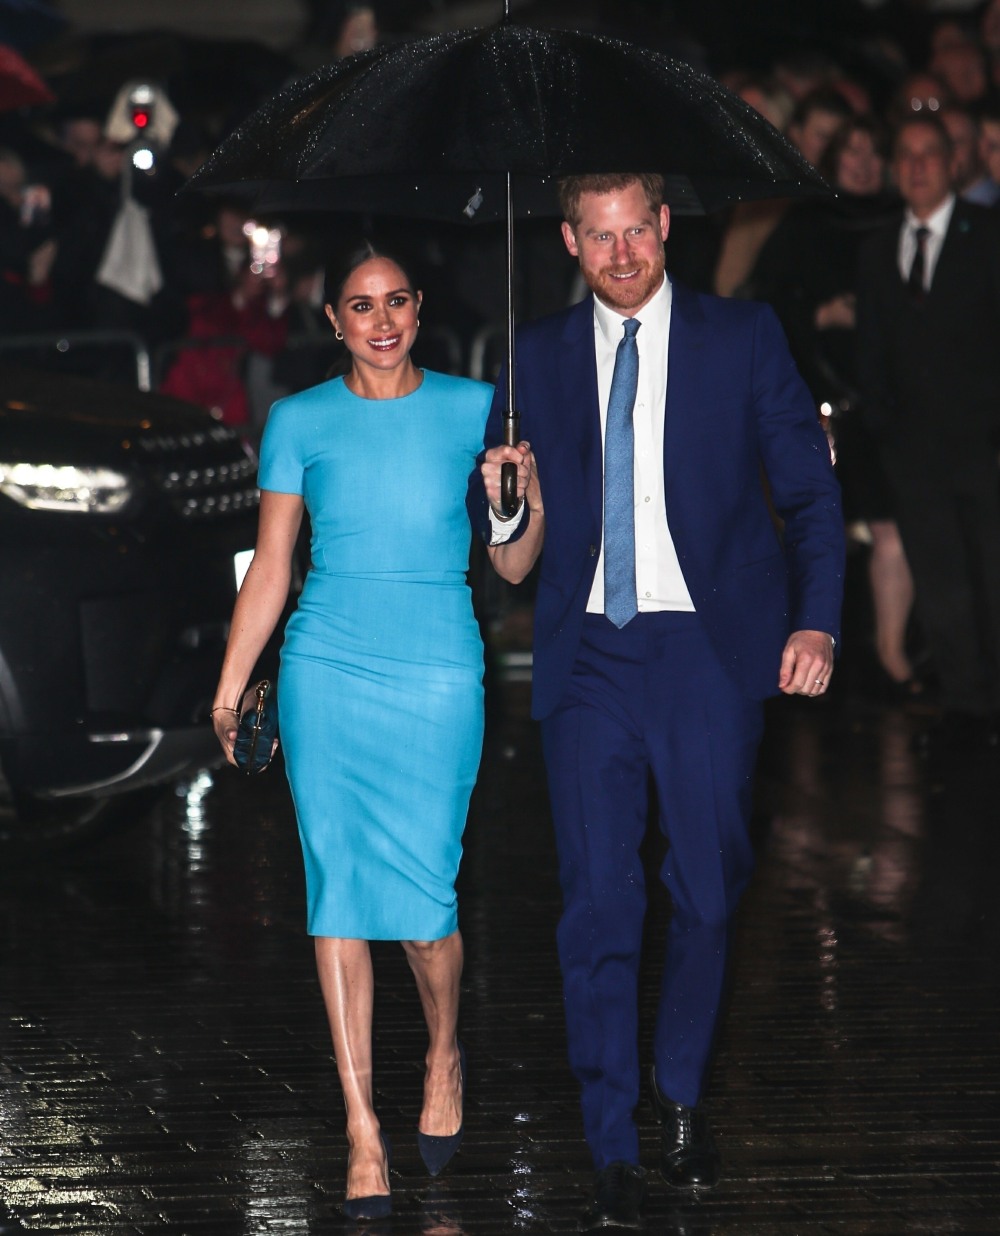 Duke of Sussex and Duchess of Sussex arriving at Mansion house